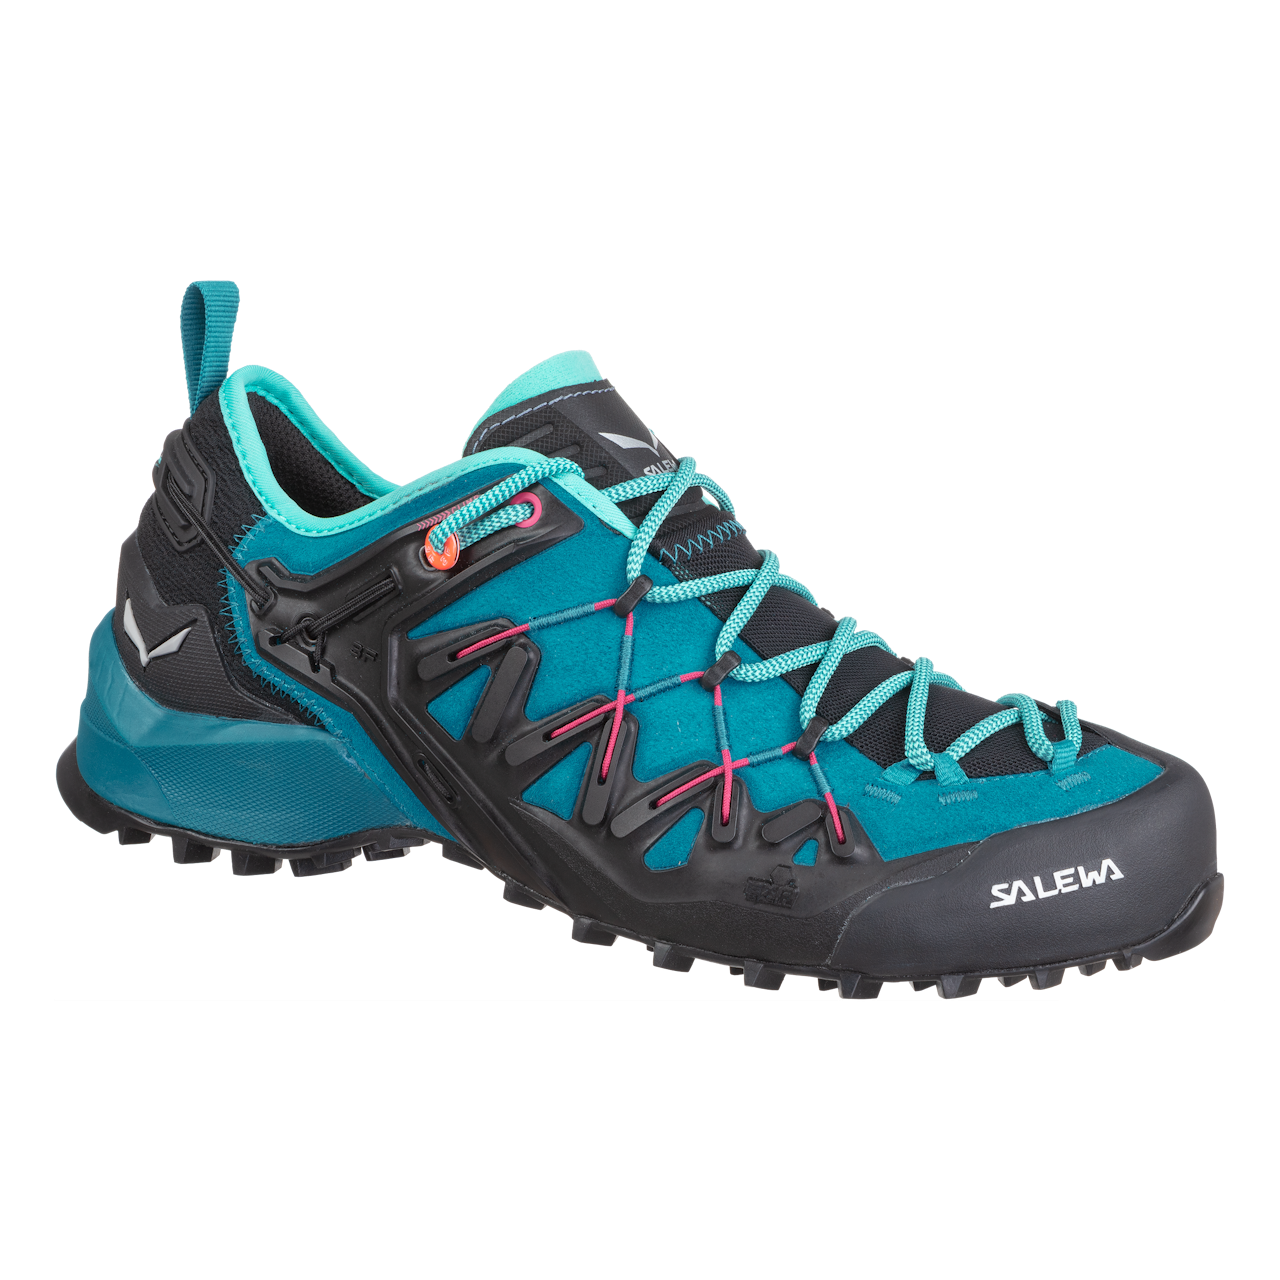 Wildfire Edge Women's Shoes